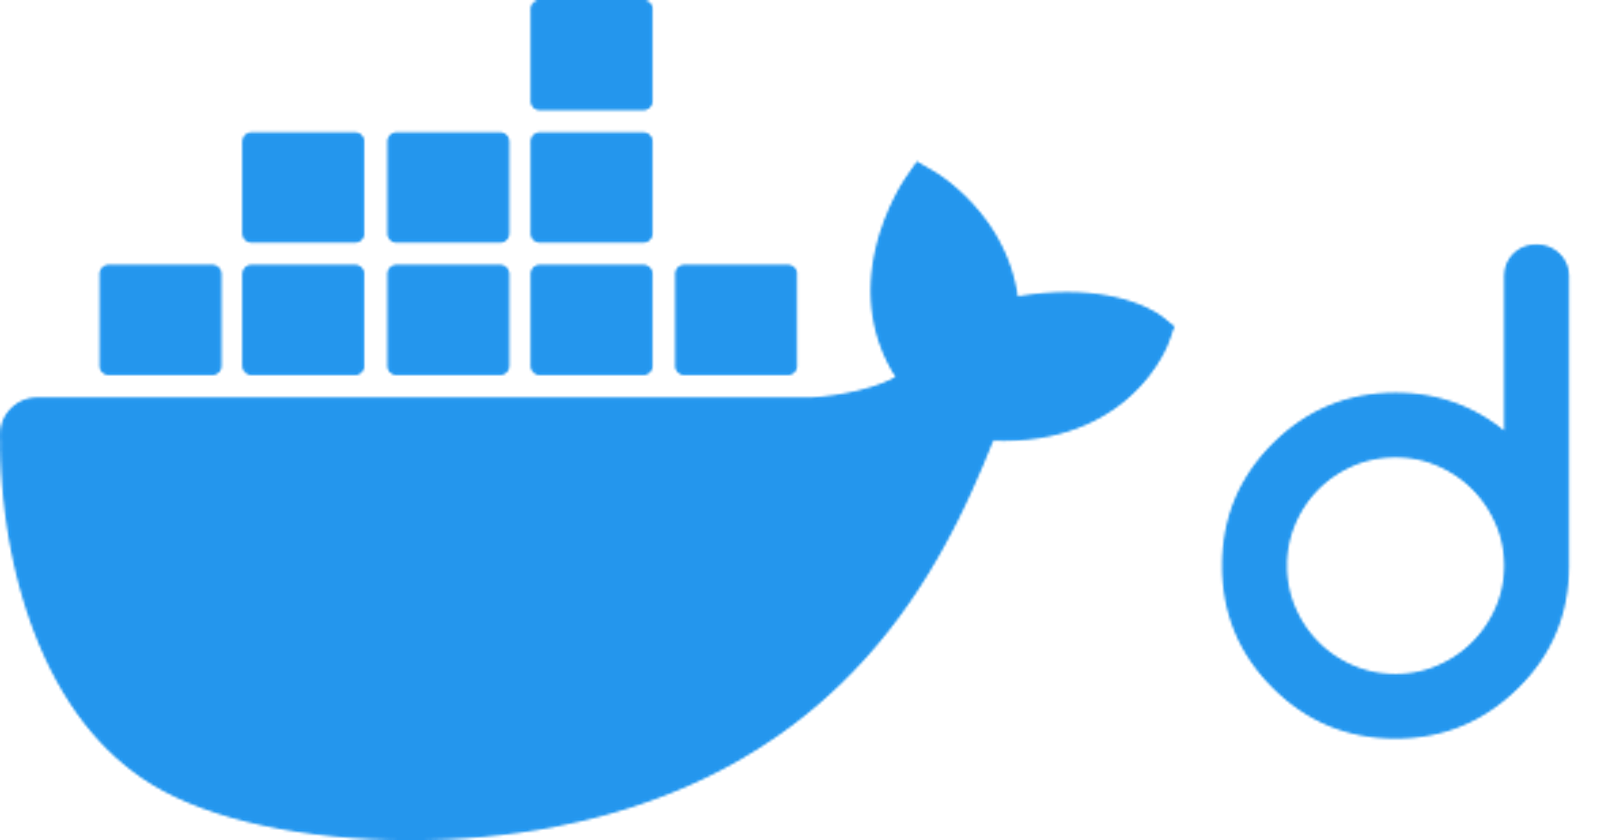 Getting started with Docker, Dockerize a React App.